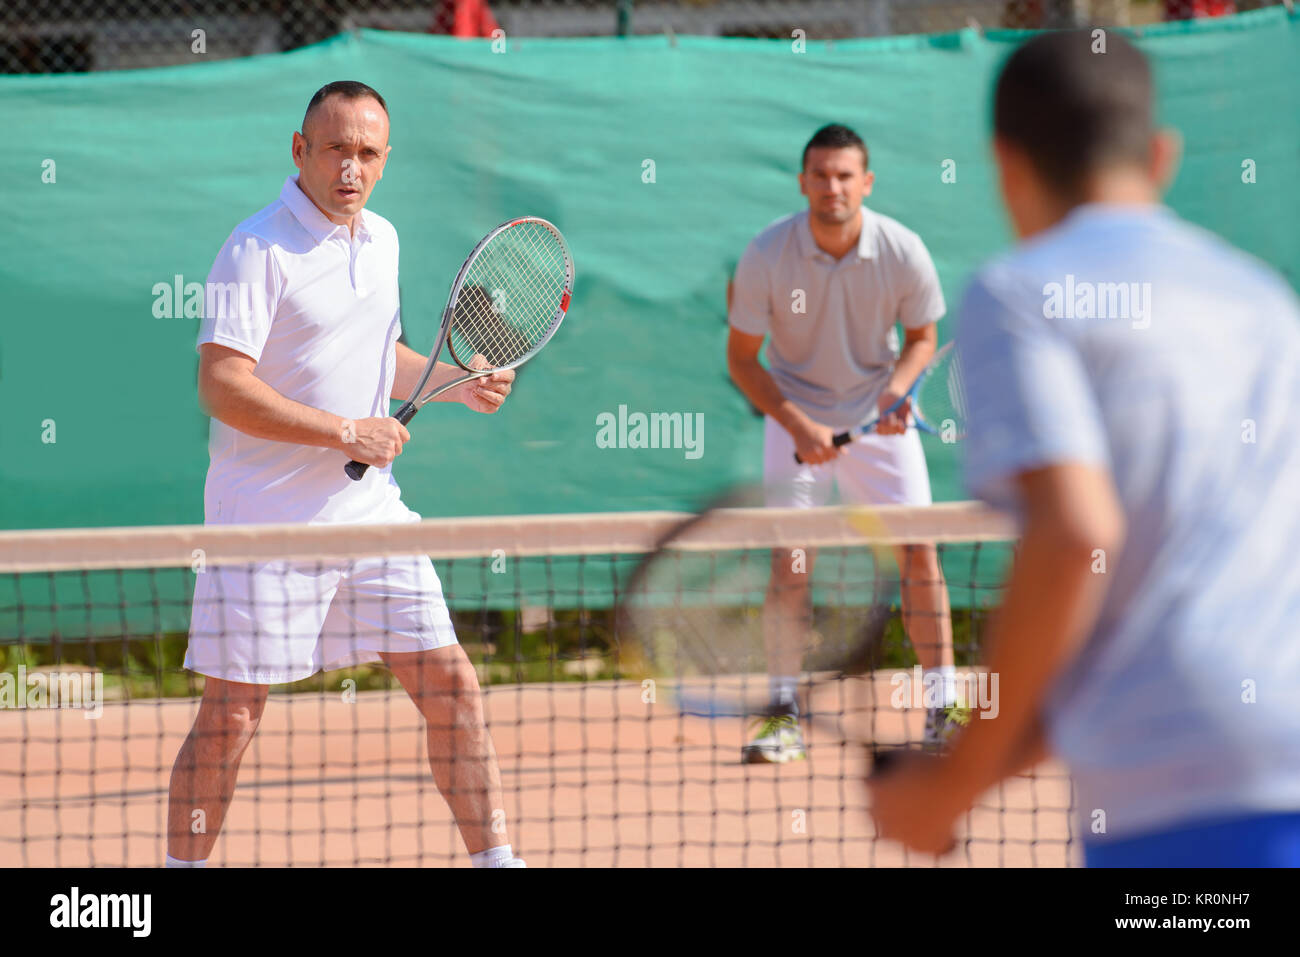 Men playing tennis doubles Stock Photo